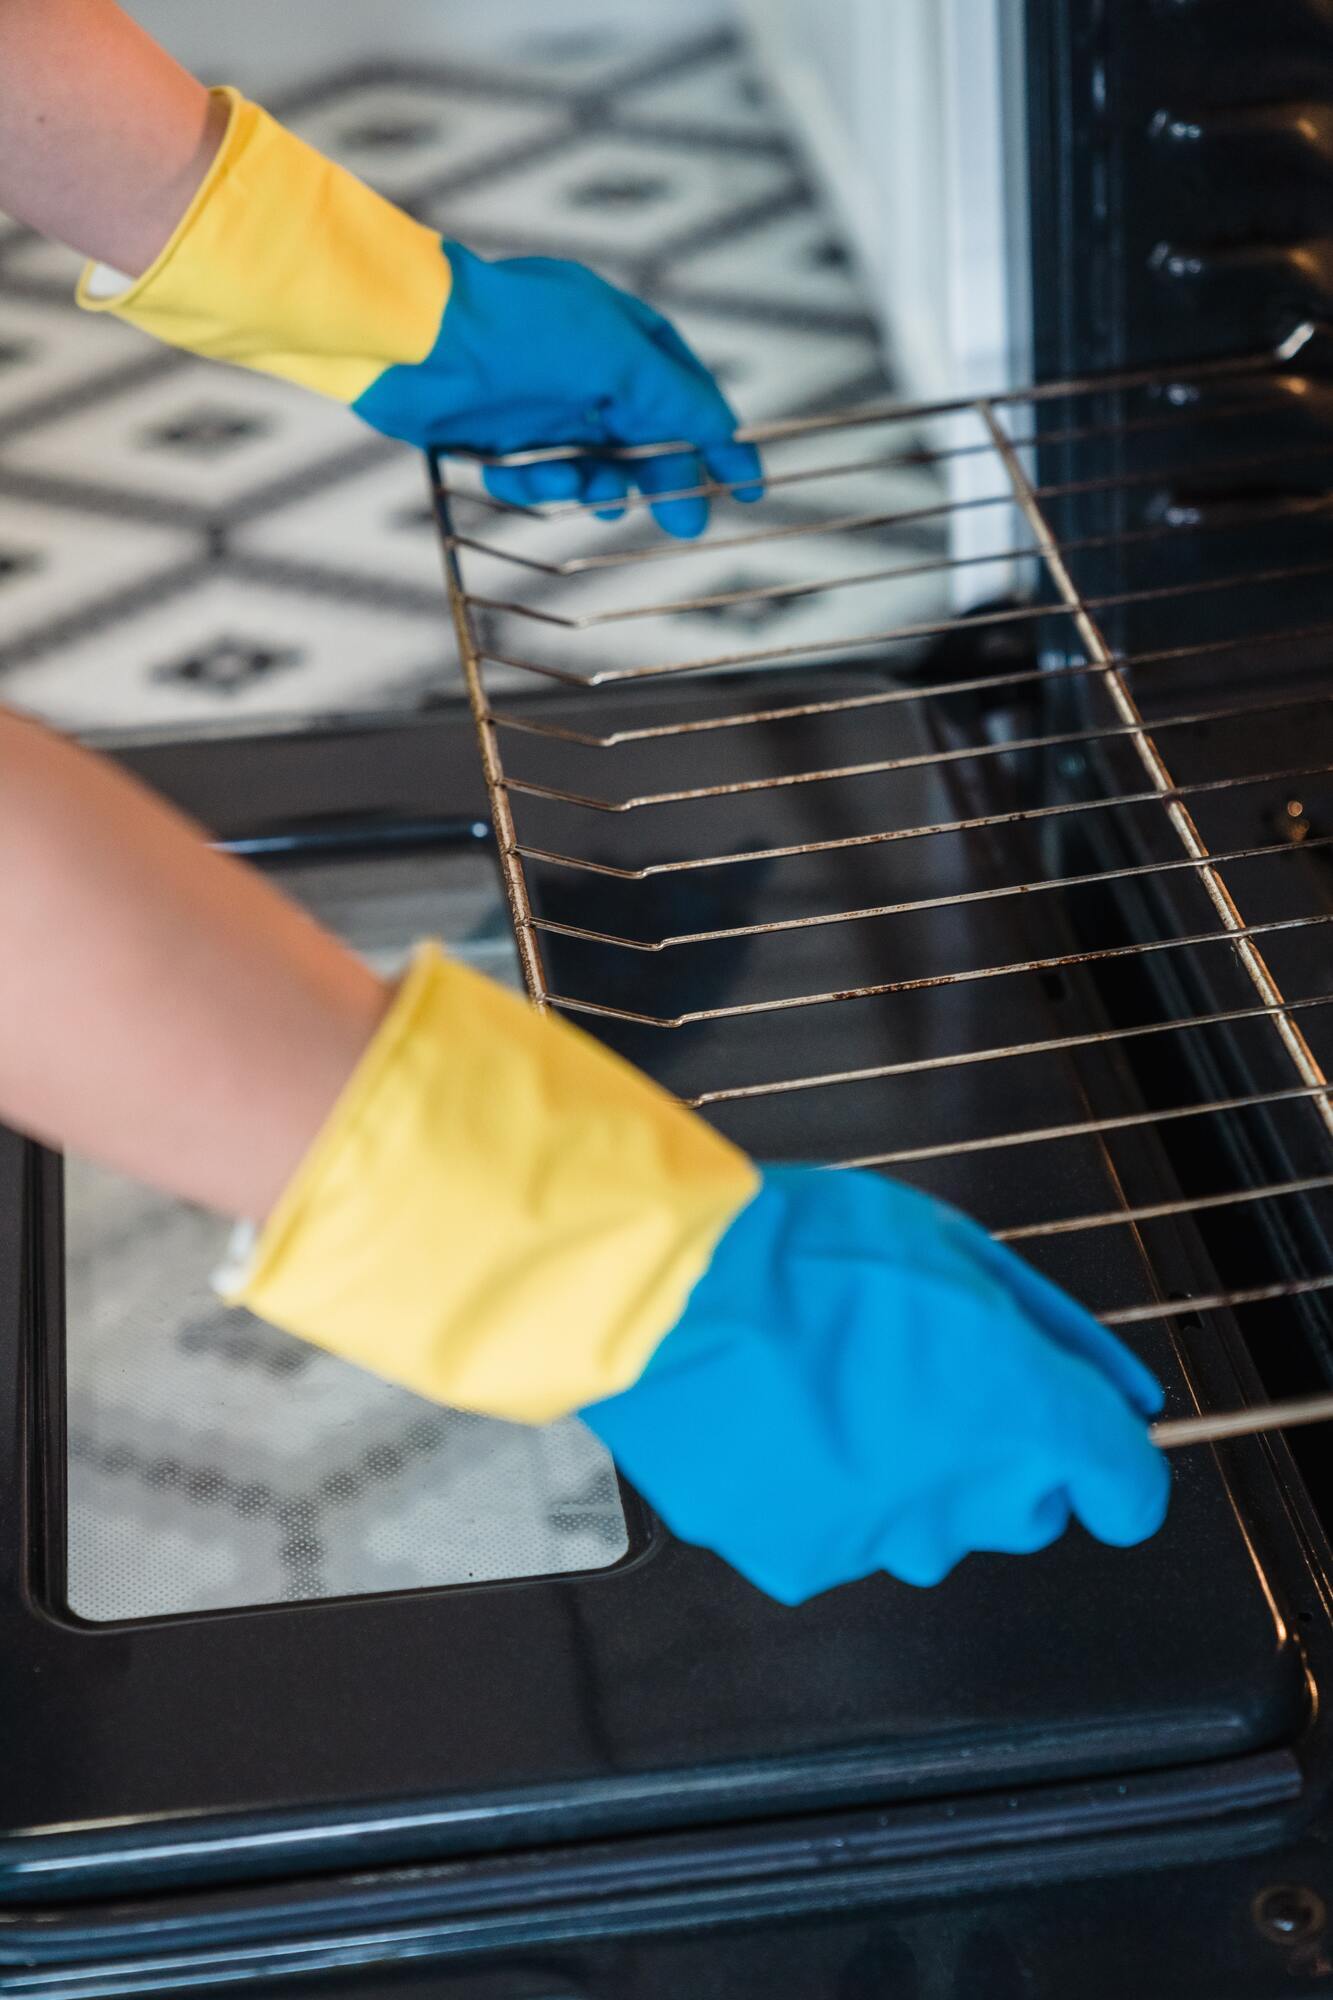 How to clean the oven from grease with vinegar quickly